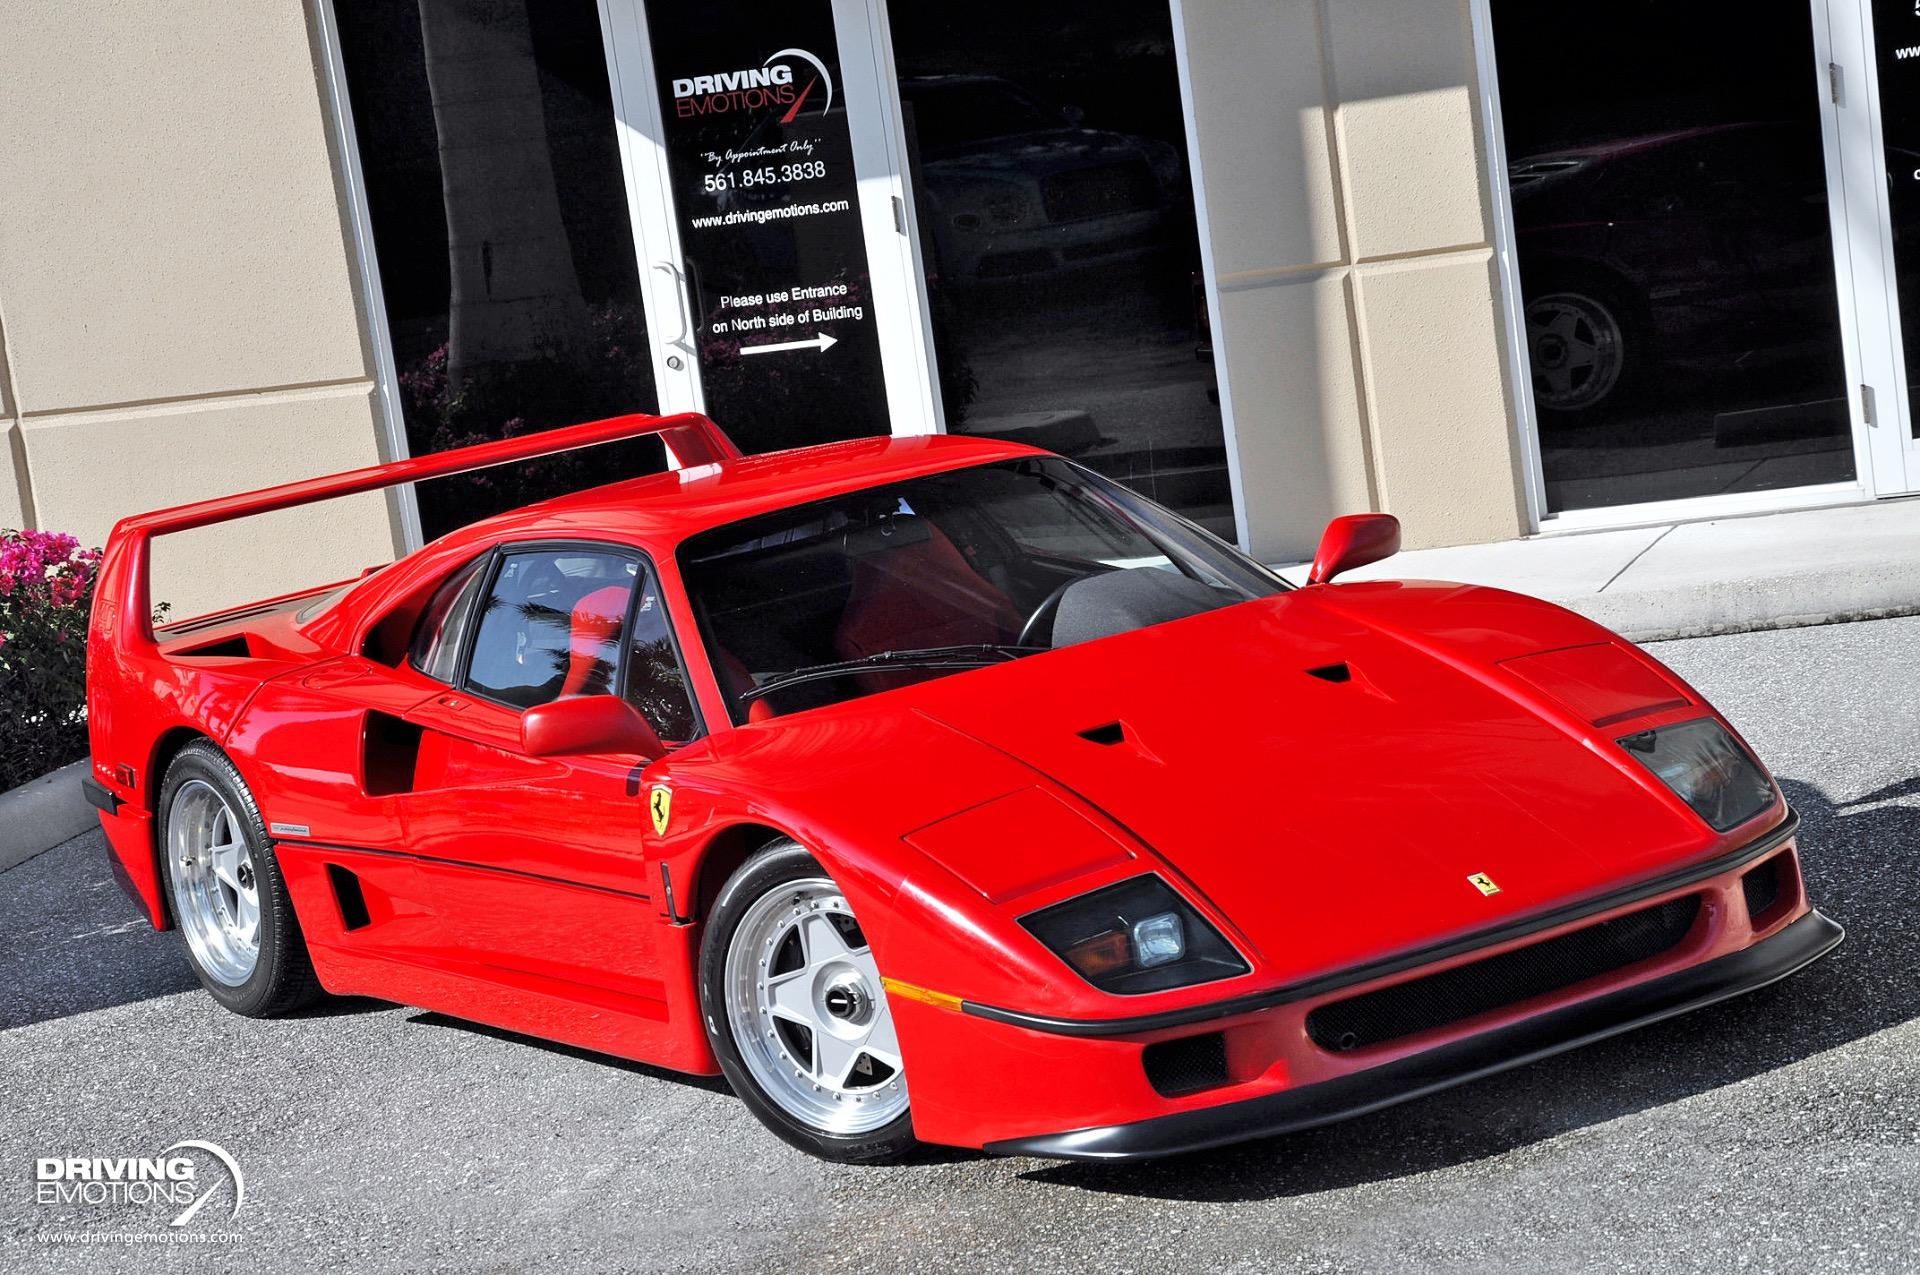 Like New Ferrari F40 Has 193 Miles On The Clock And A Huge Desire To Be Driven Carscoops